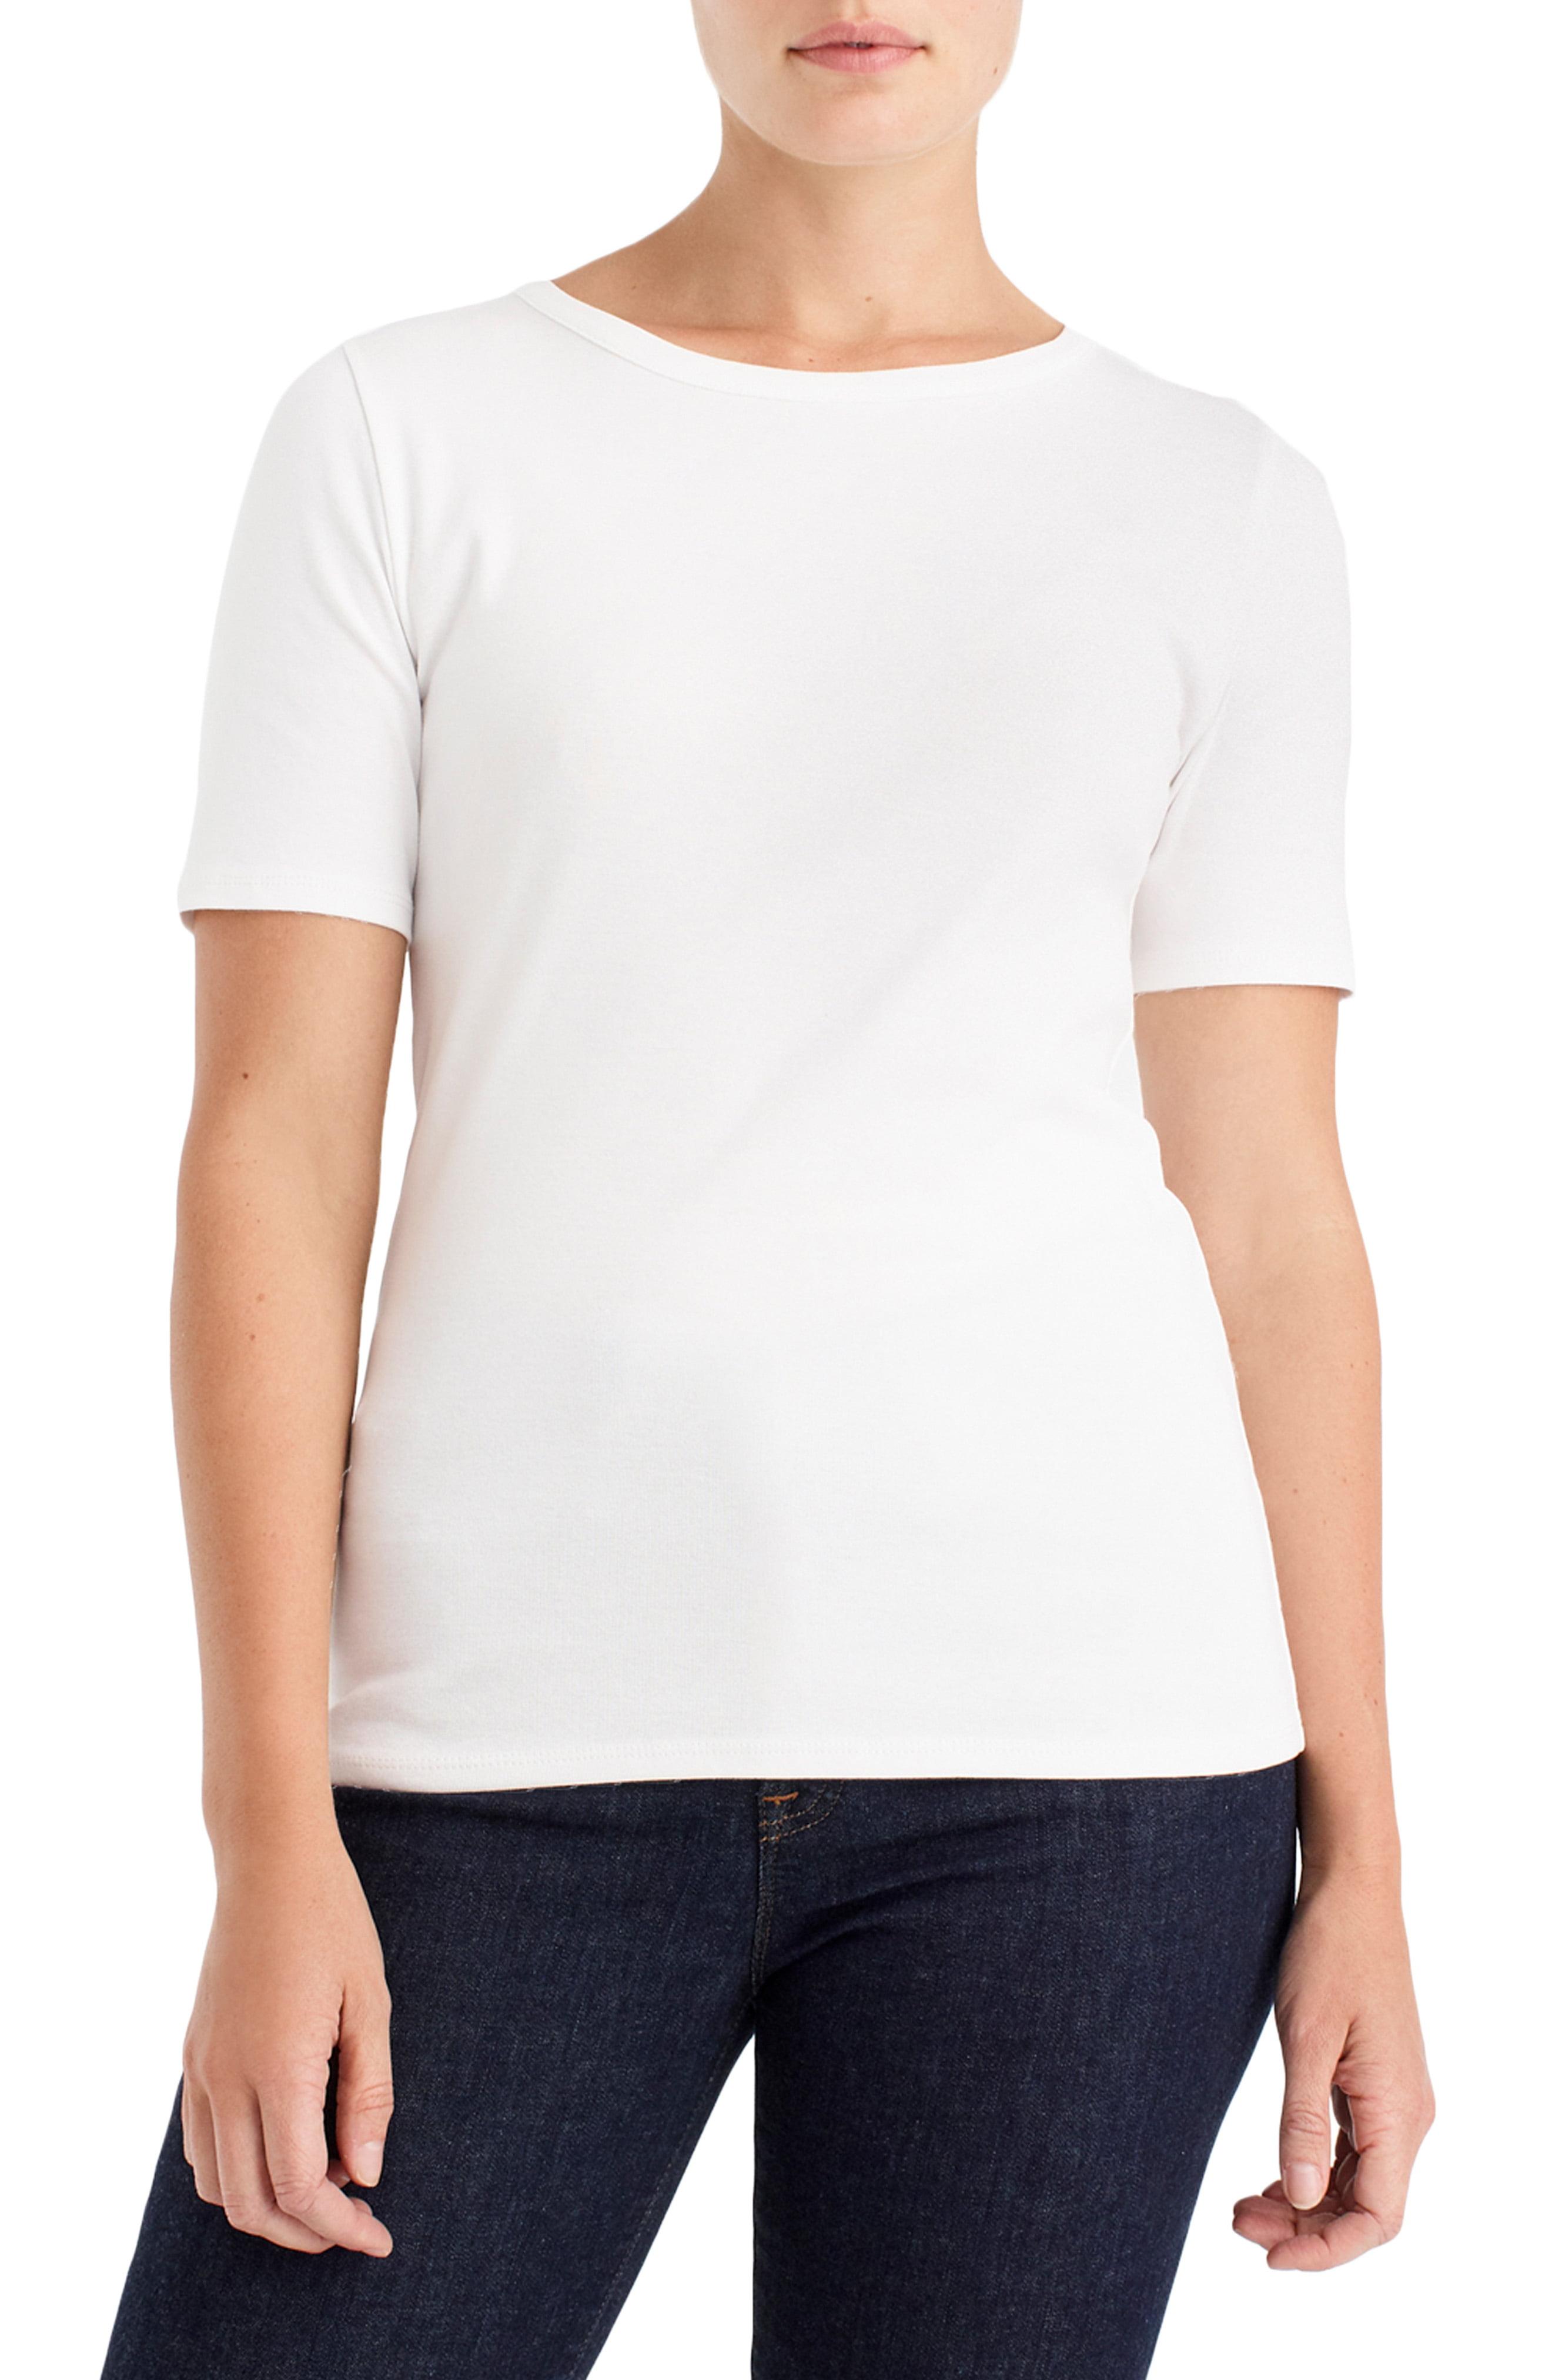 J.Crew New Perfect Fit Tee in White - Lyst